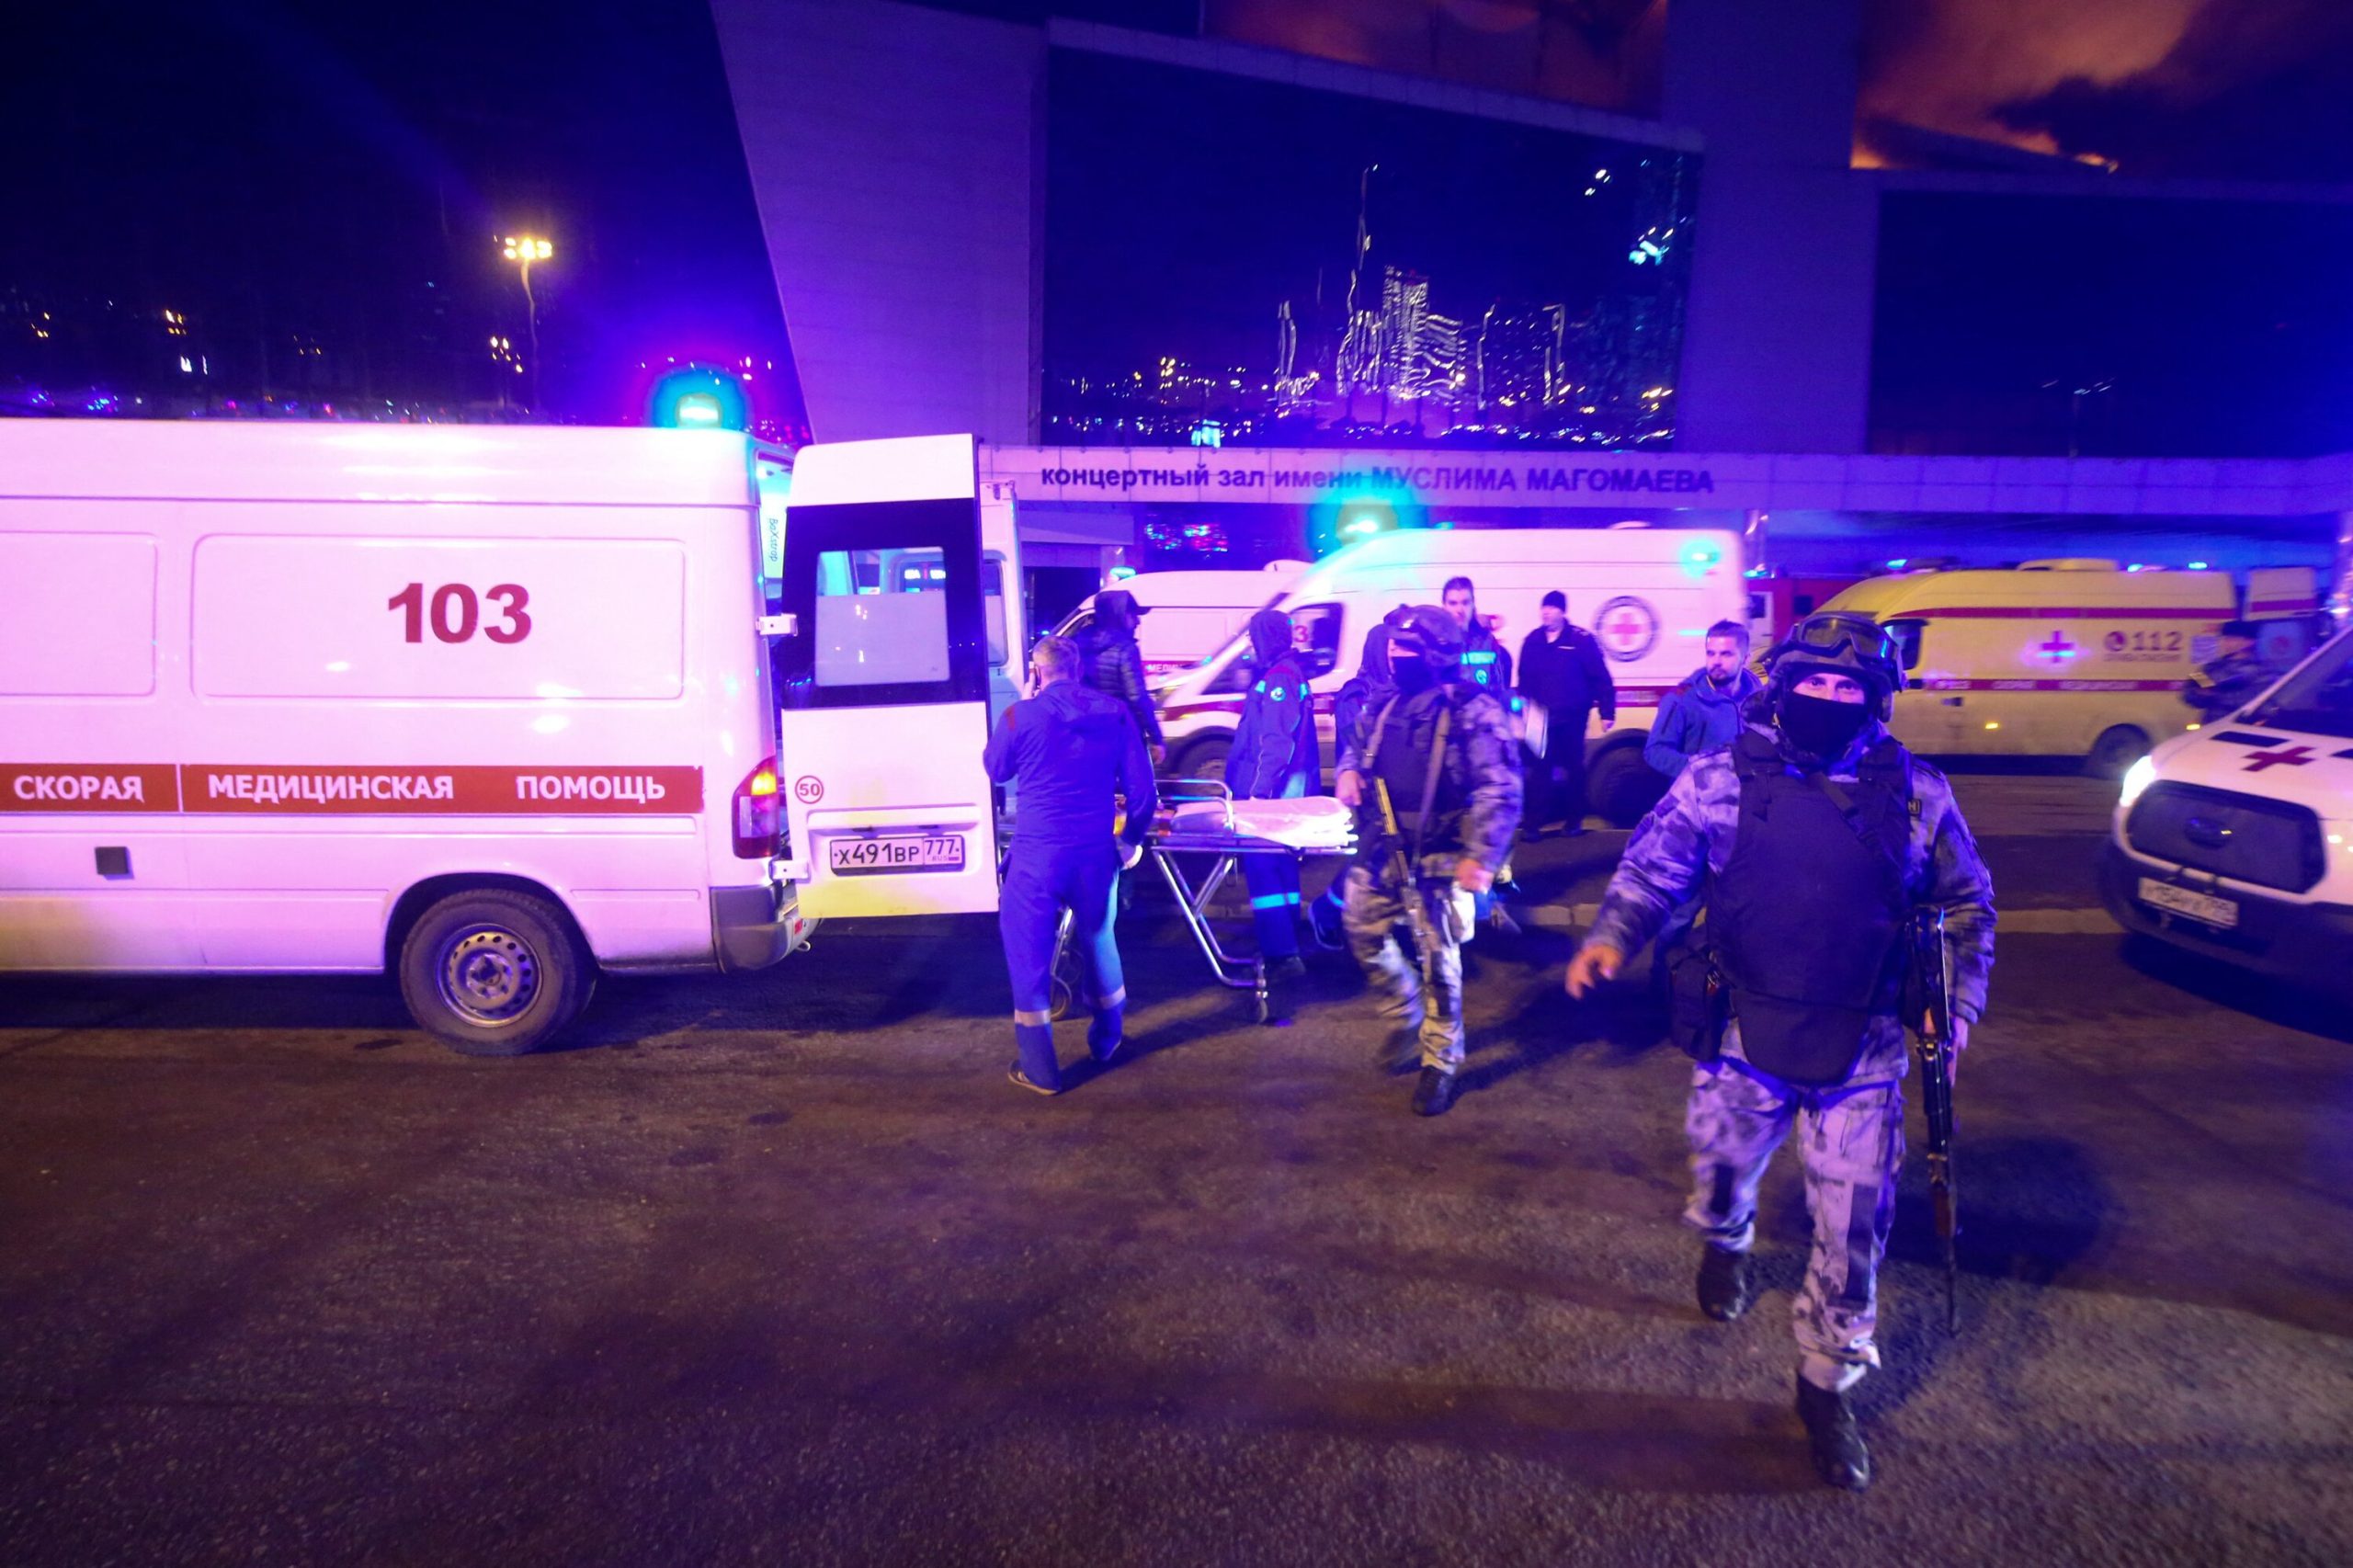 Gun attack at Moscow concert leaves more than 60 dead